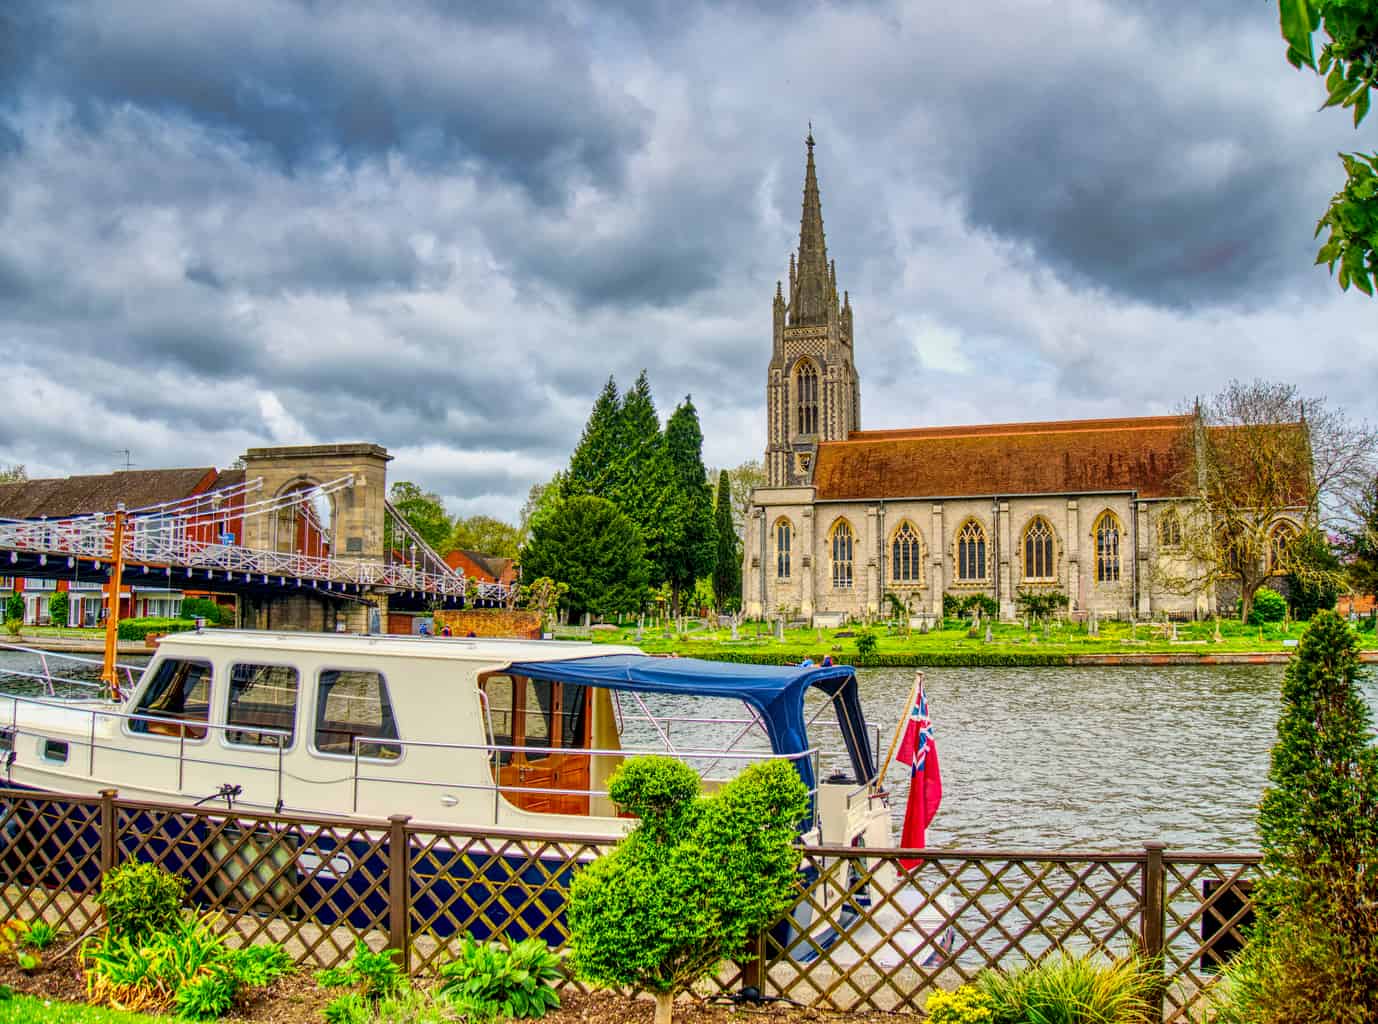 A boat on a river in Marlow with a church behind with dark clouds and green trees